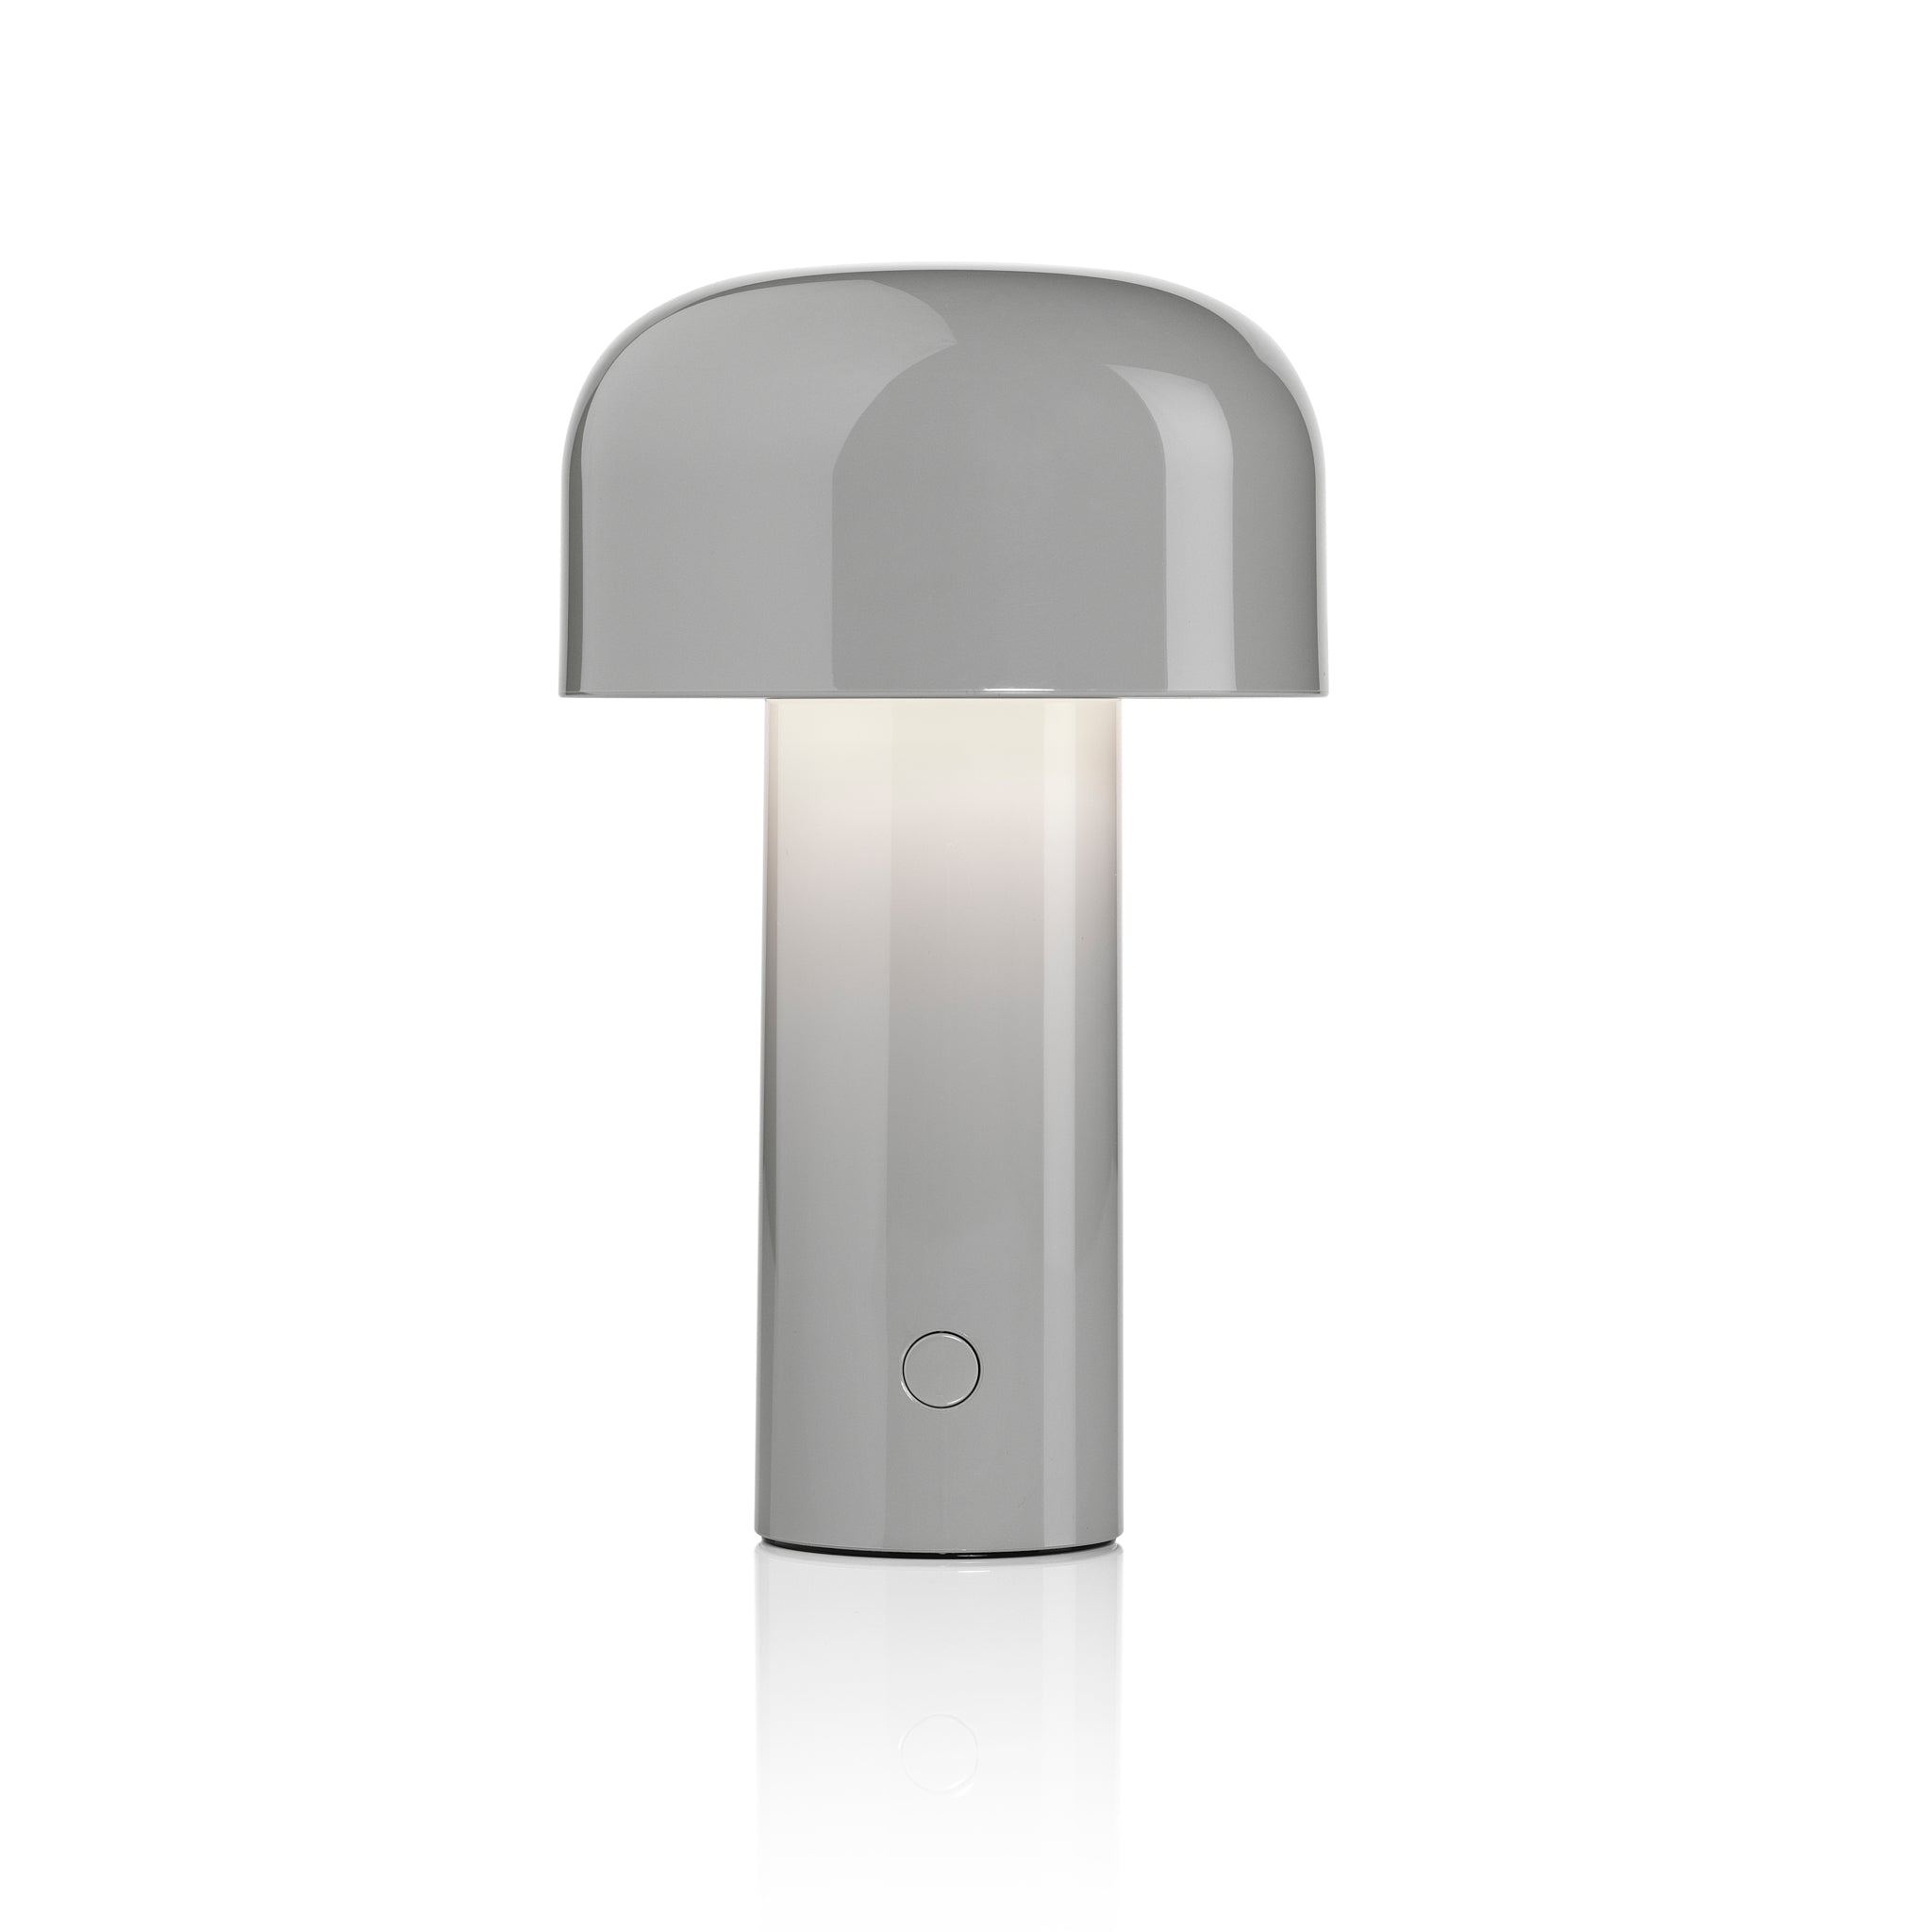 Bellhop Portable Table Lamp by Edward Barber & Jay Osgerby for Flos